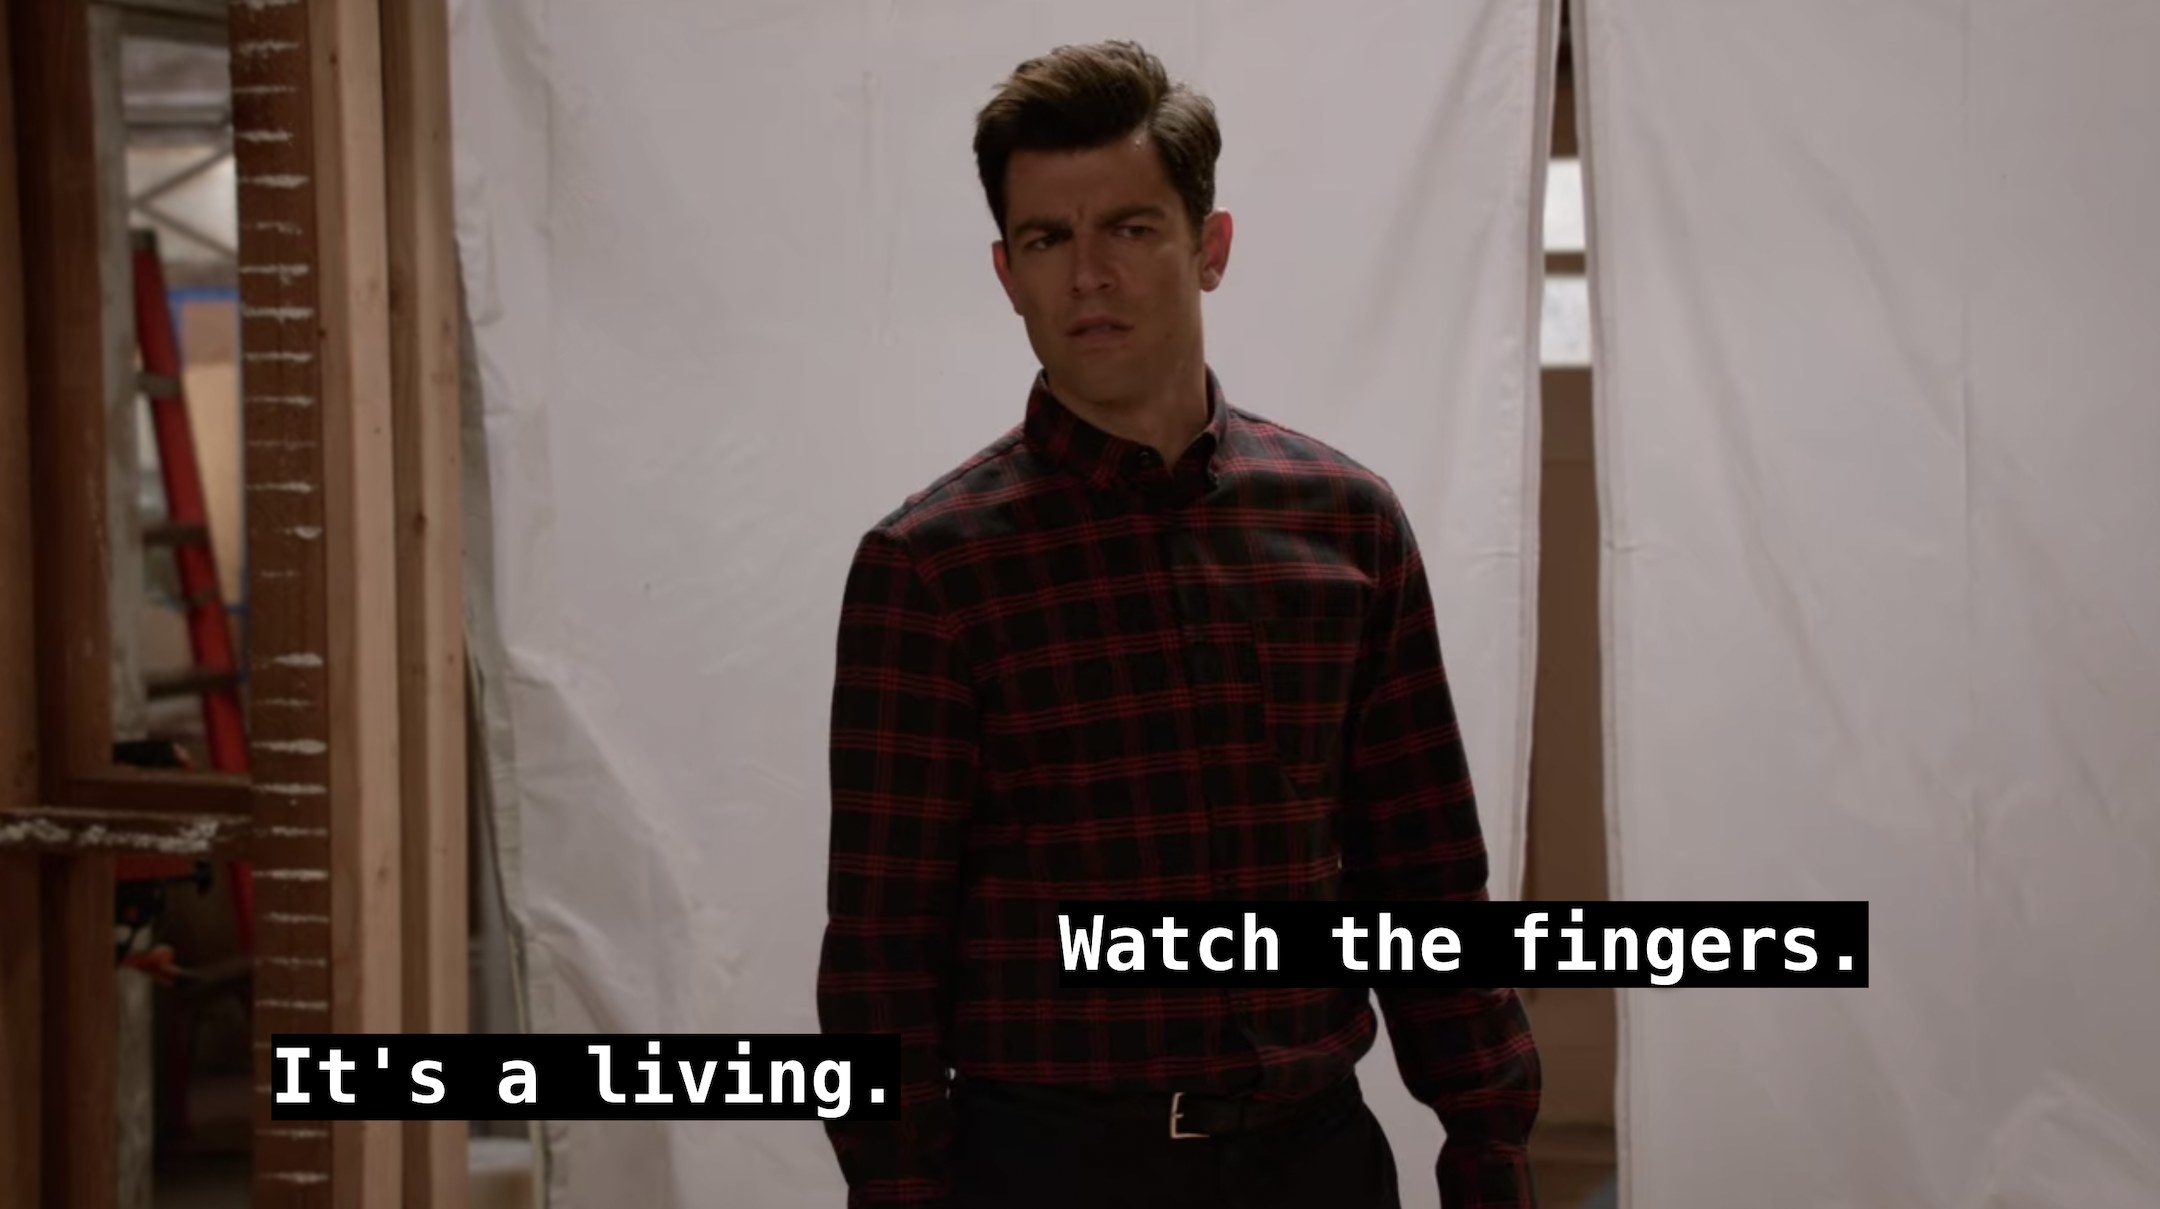 Schmidt looks on confused as he hears Jason say, Its a living, and Nick says, Watch the fingers